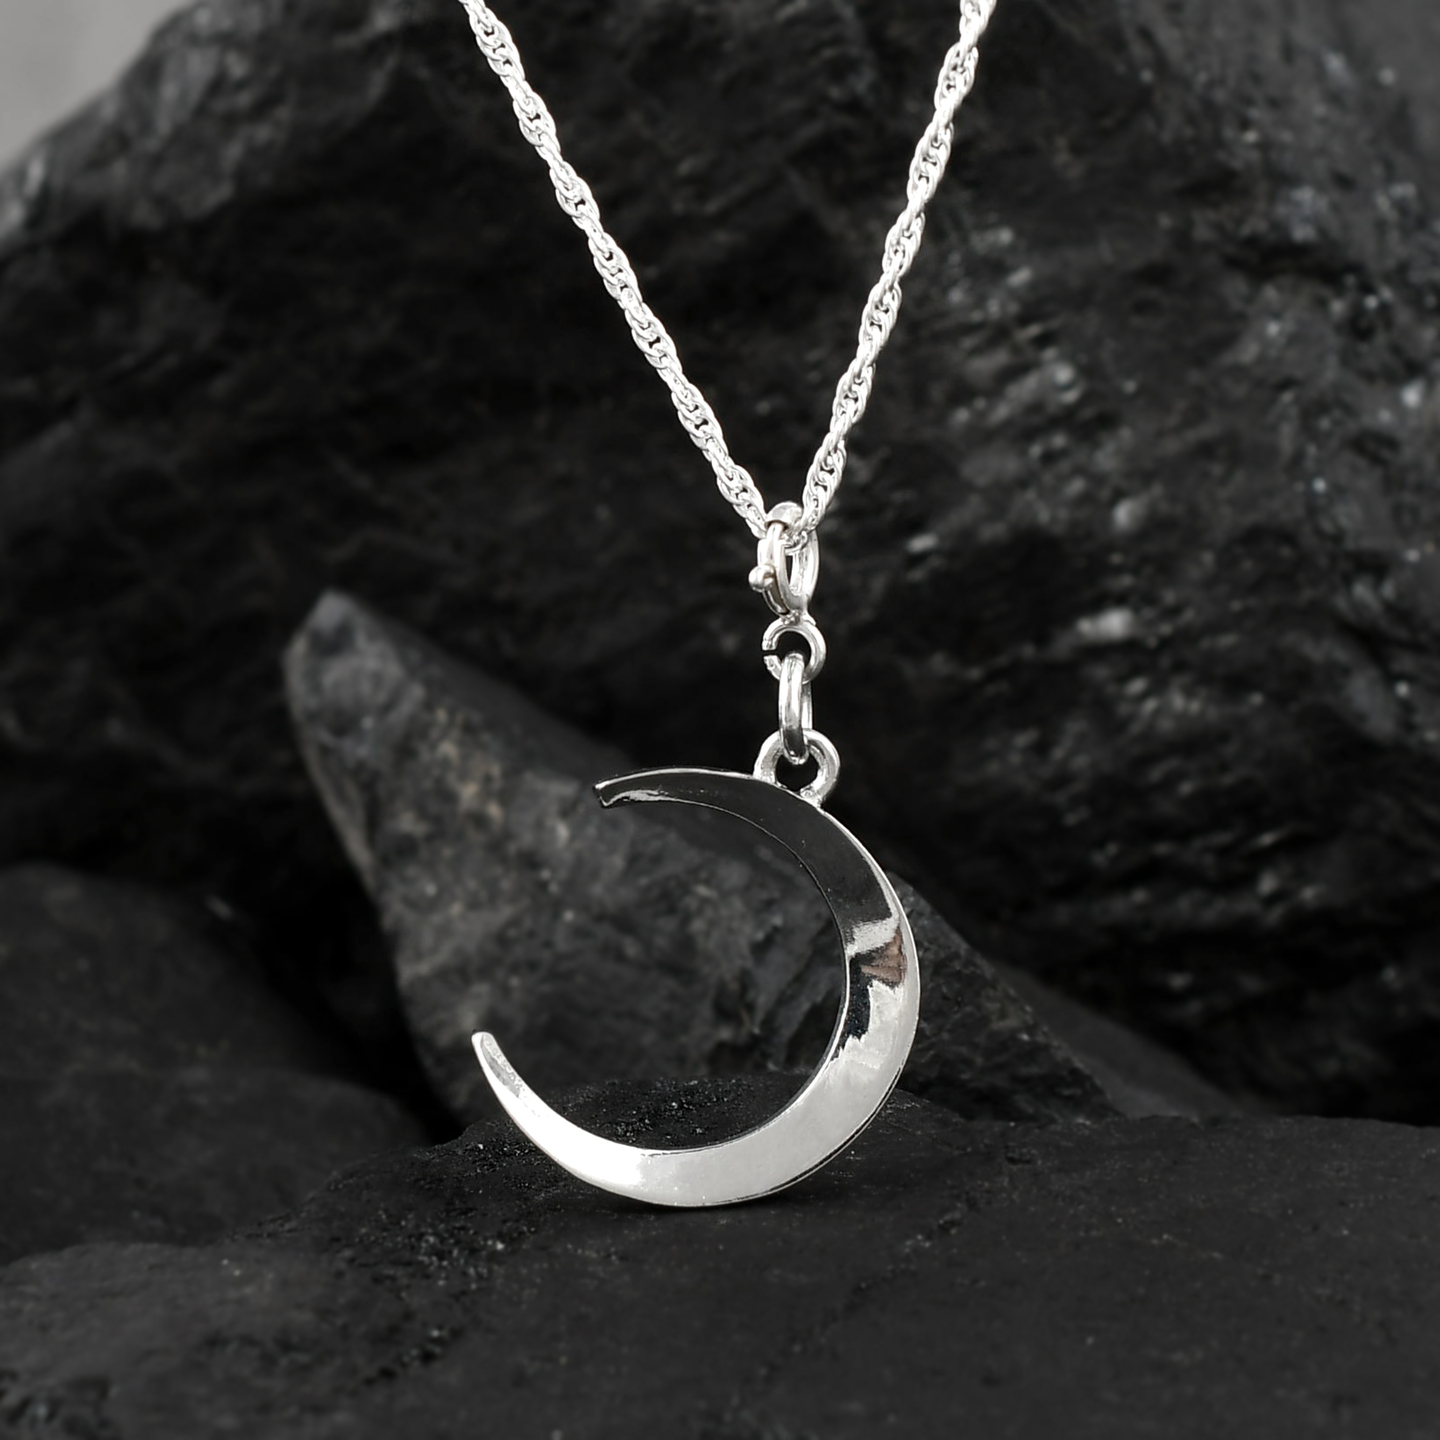 Silver Moon Pendant With Chain